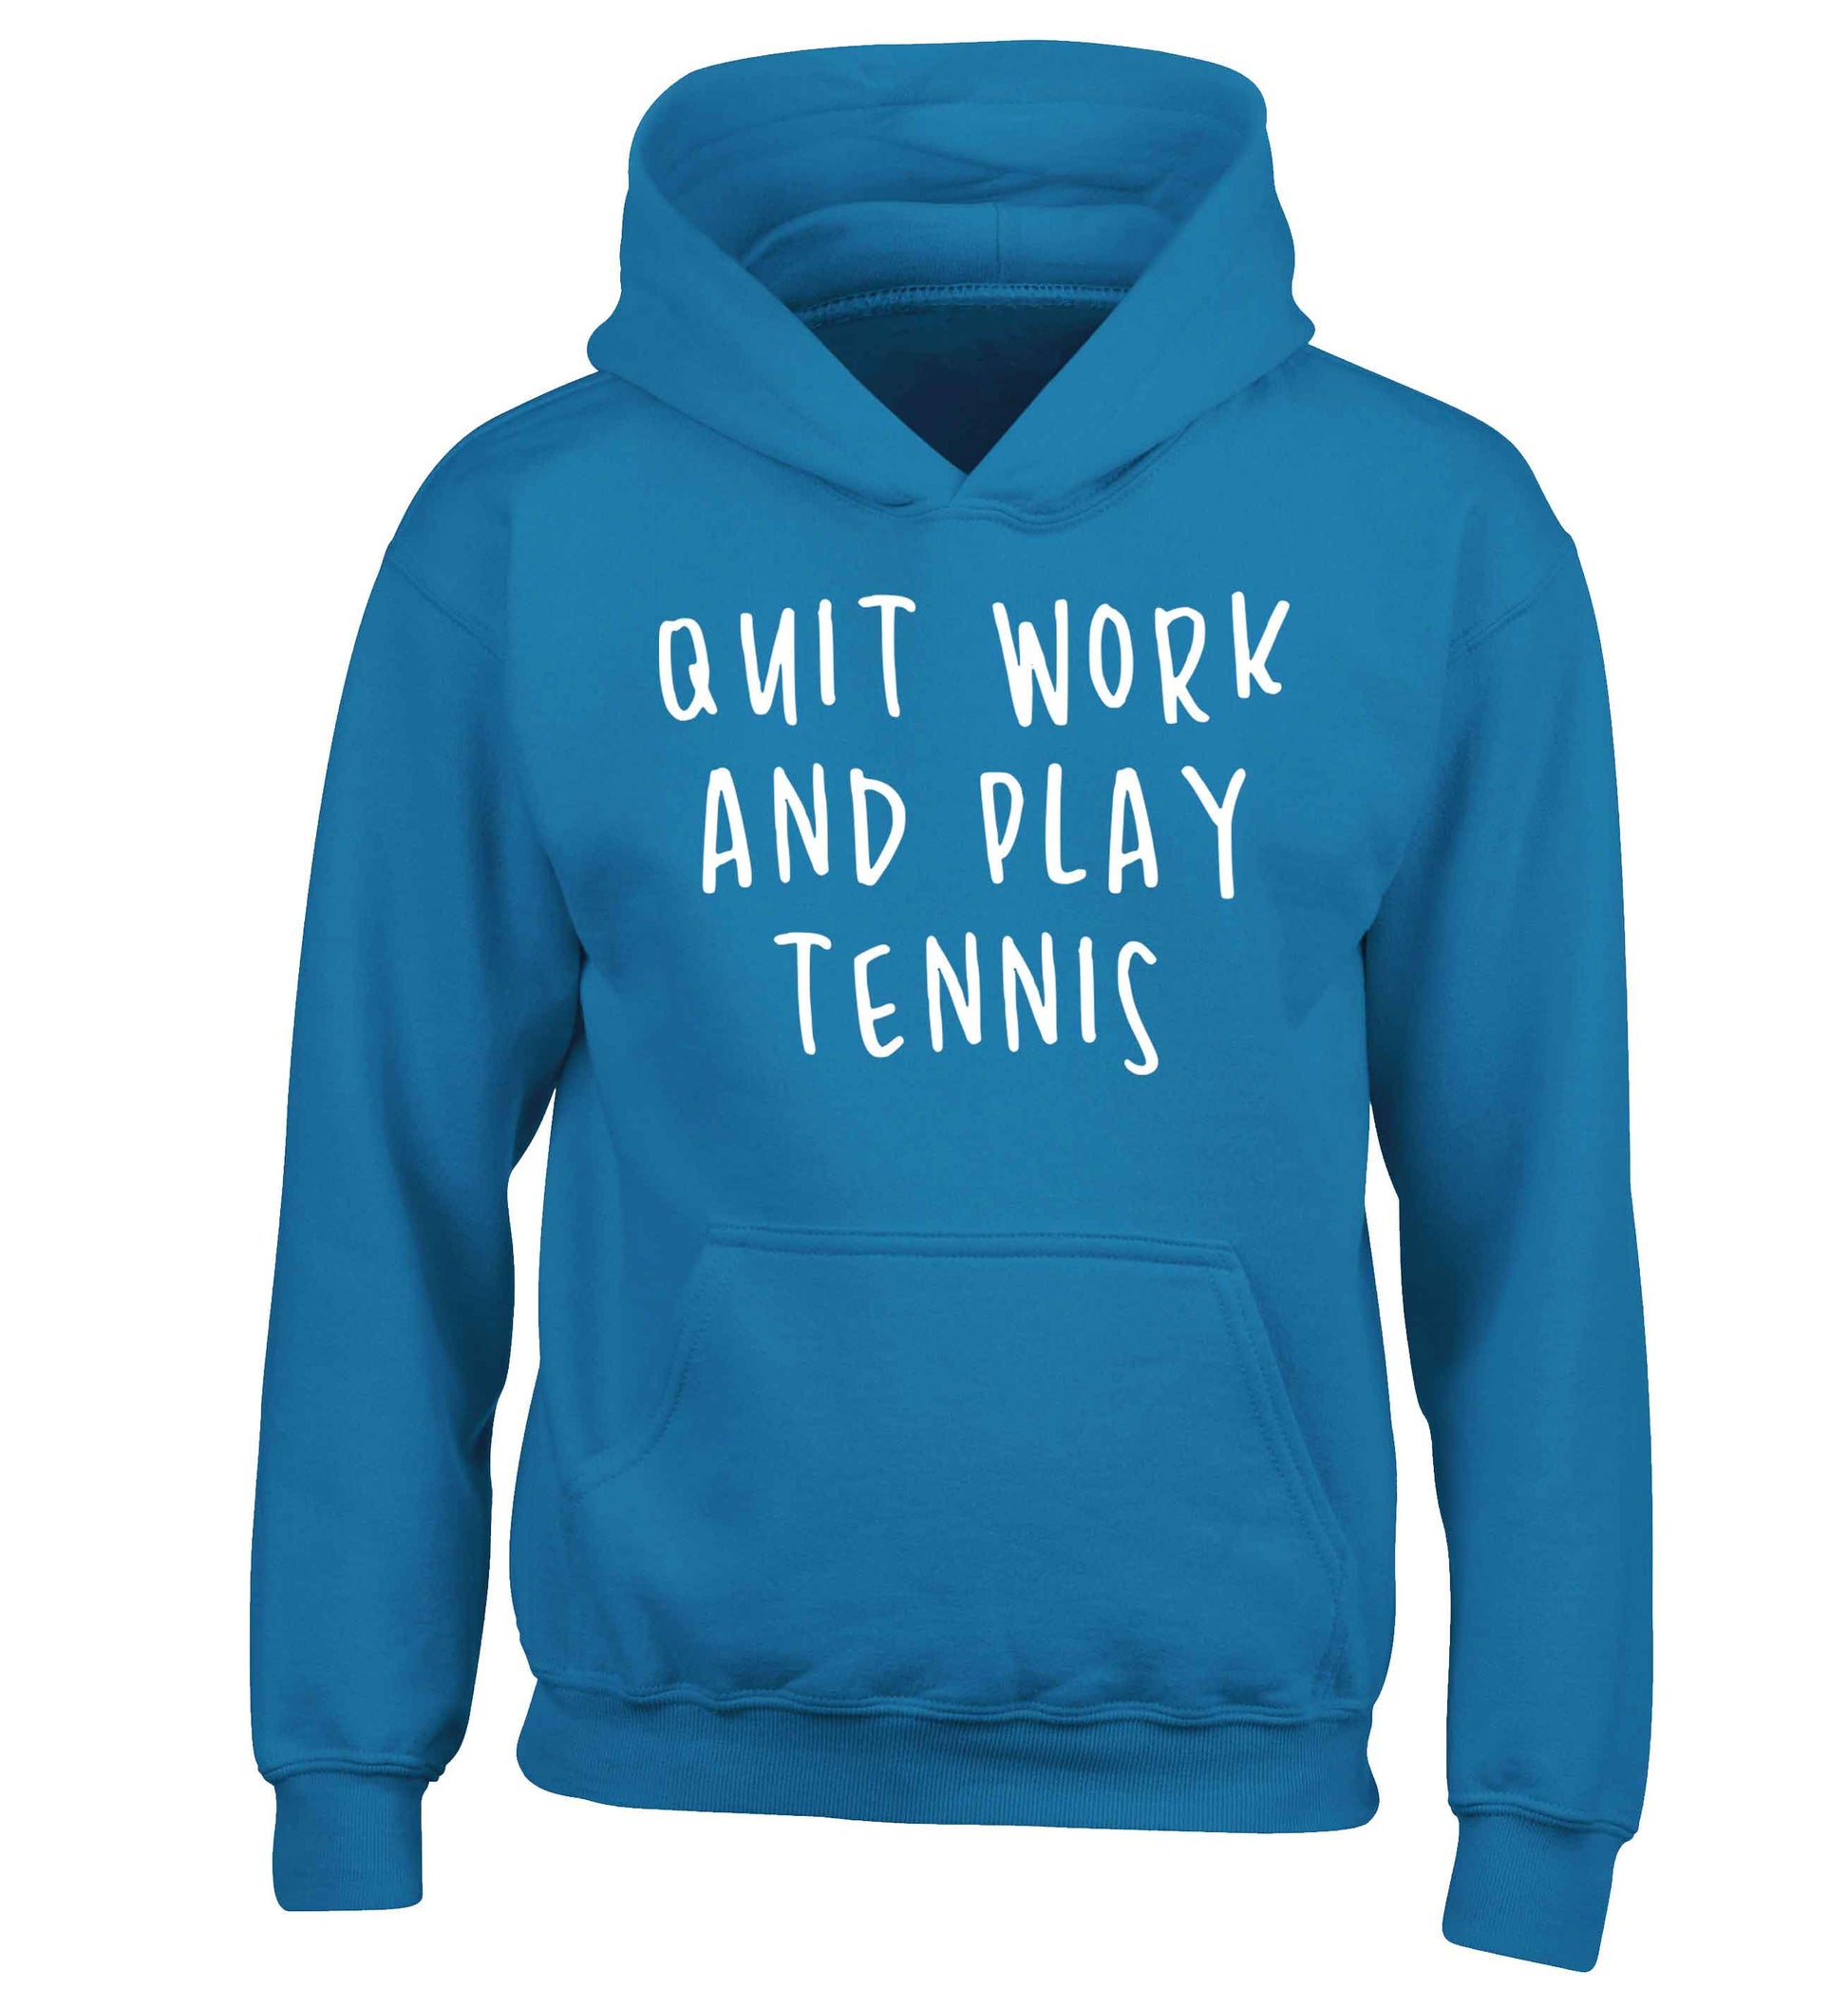 Quit work and play tennis children's blue hoodie 12-13 Years